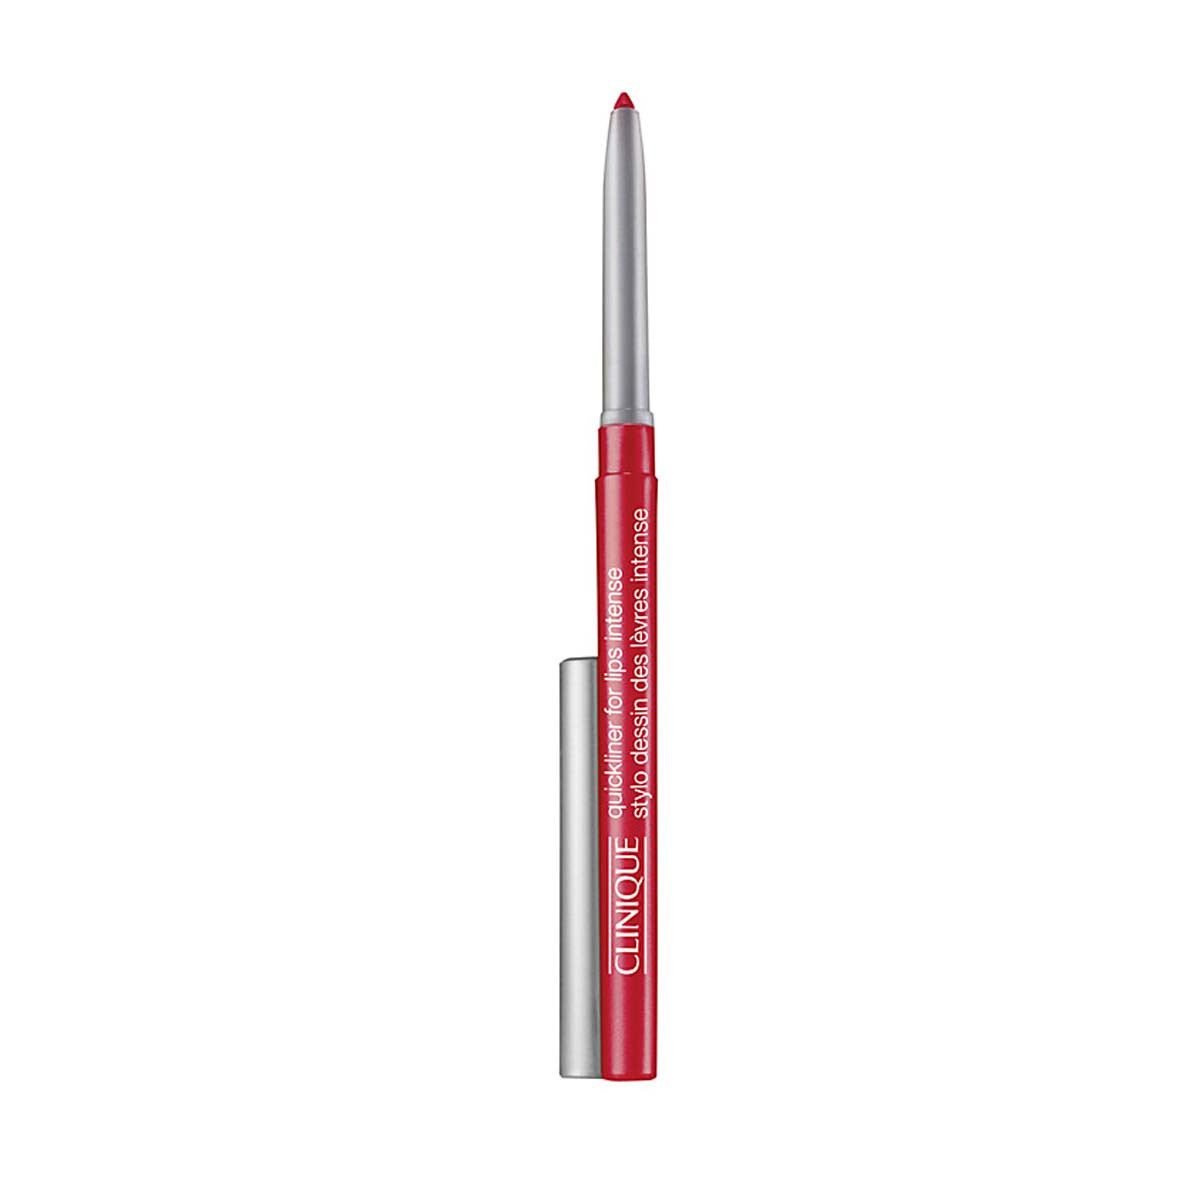 Clinique quicklinerTM for lips intense - 05 intense passion, 05 INTENSE PASSION, large image number 0